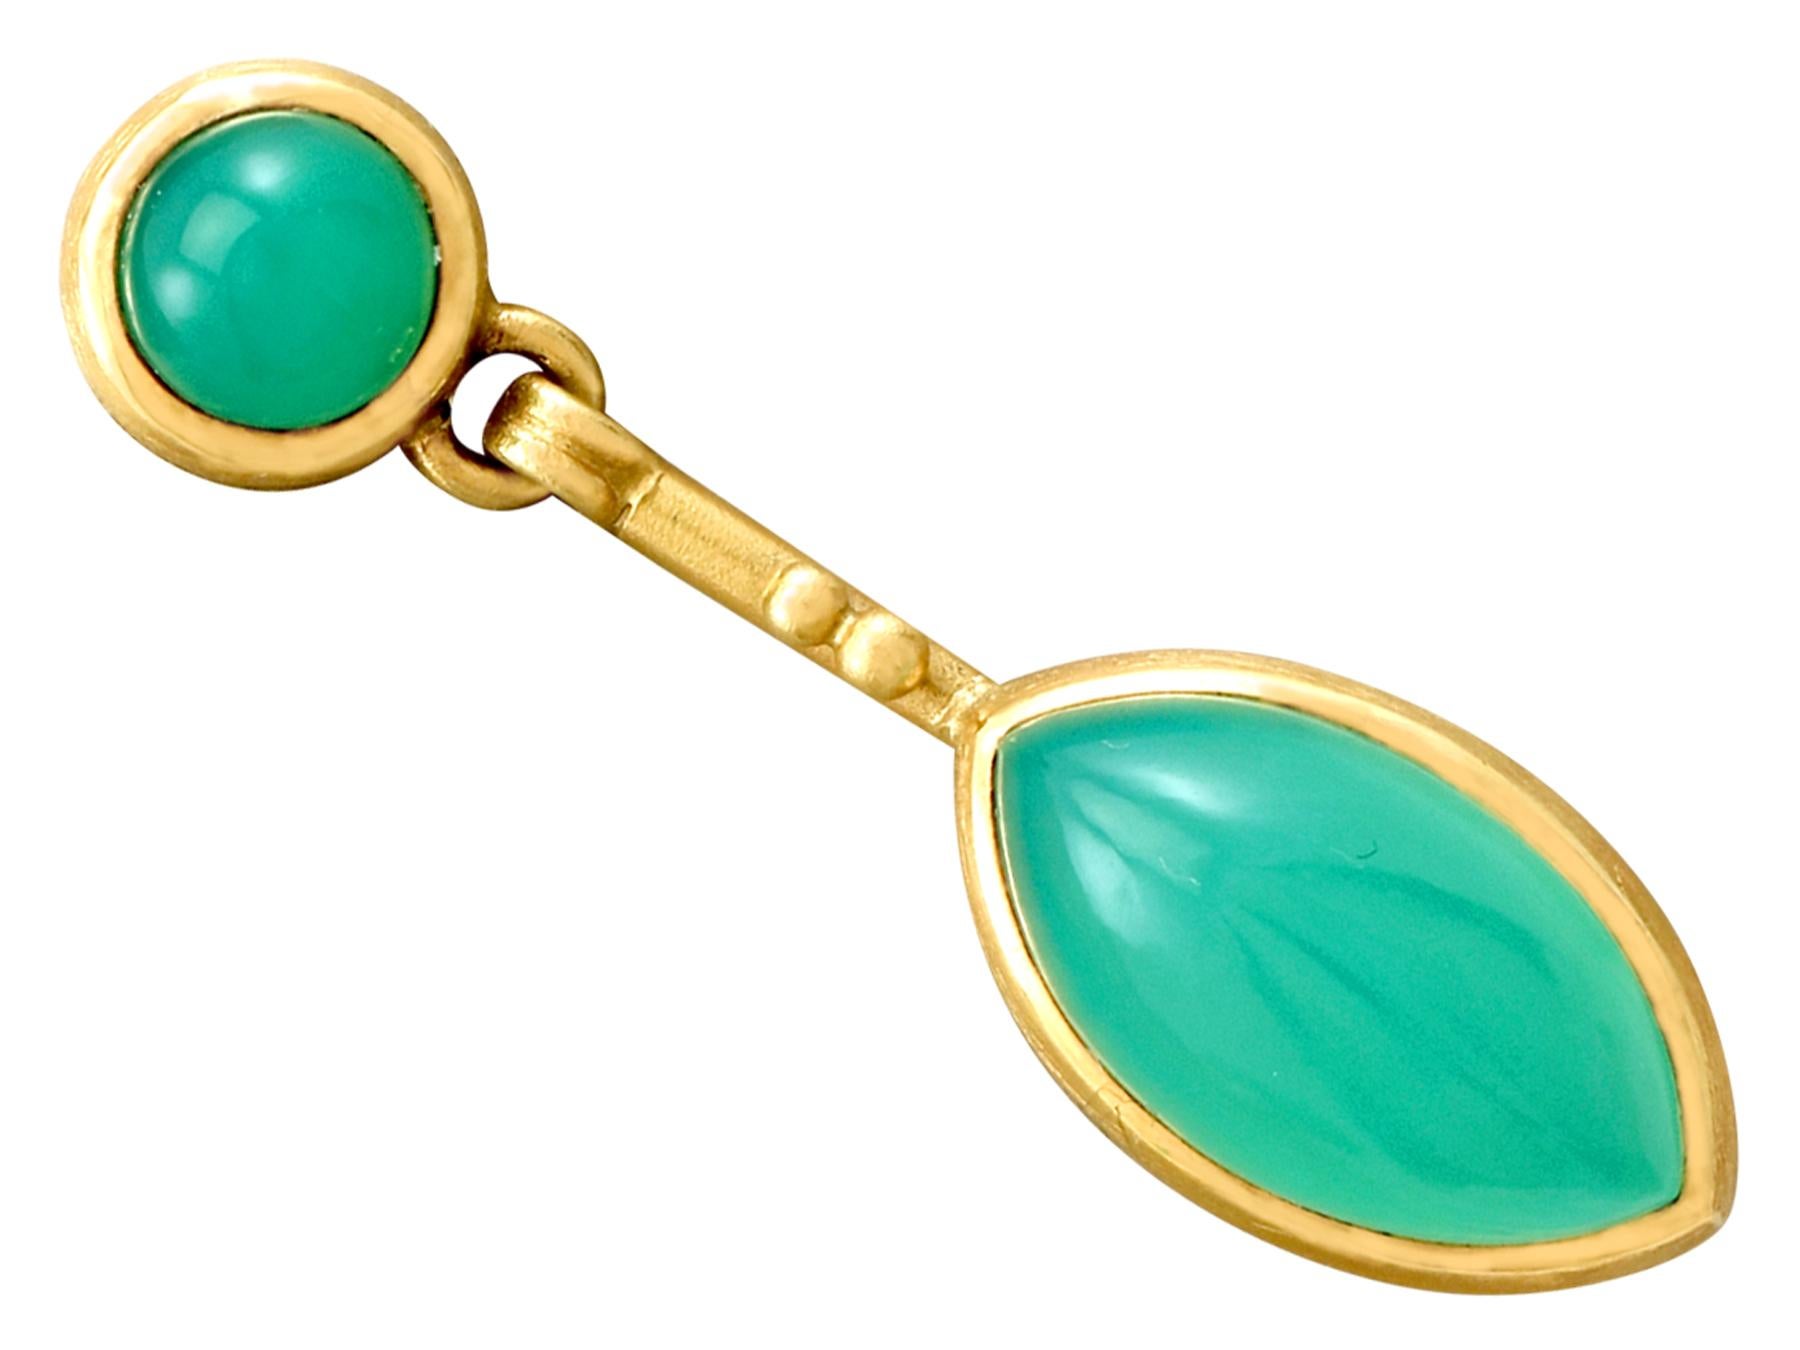 An impressive pair of vintage Italian 10.54 carat chrysoprase and 18 karat yellow gold drop earrings by Salcher Reinhard; part of our diverse vintage jewelry and estate jewelry collections.

These fine and impressive vintage gold earrings have been